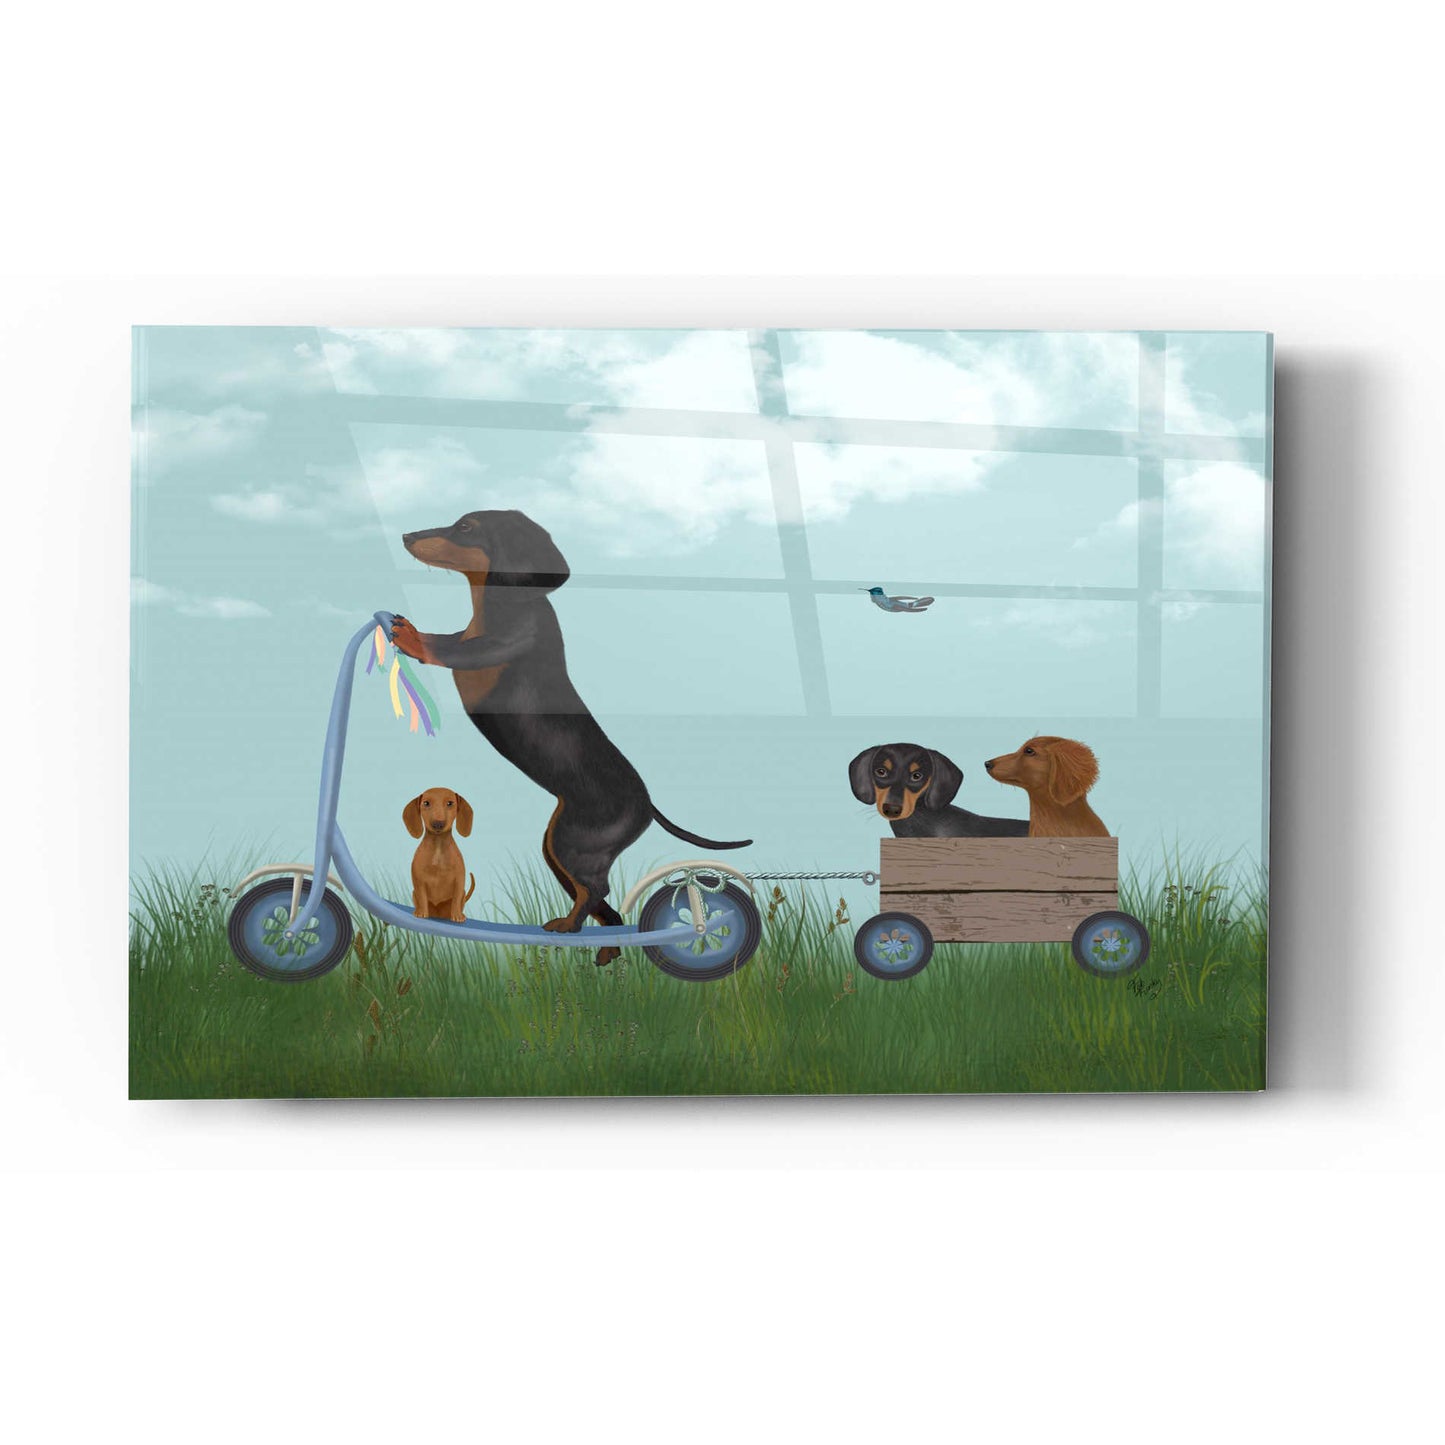 Epic Art 'Dachshund Scooter' by Fab Funky Acrylic Glass Wall Art